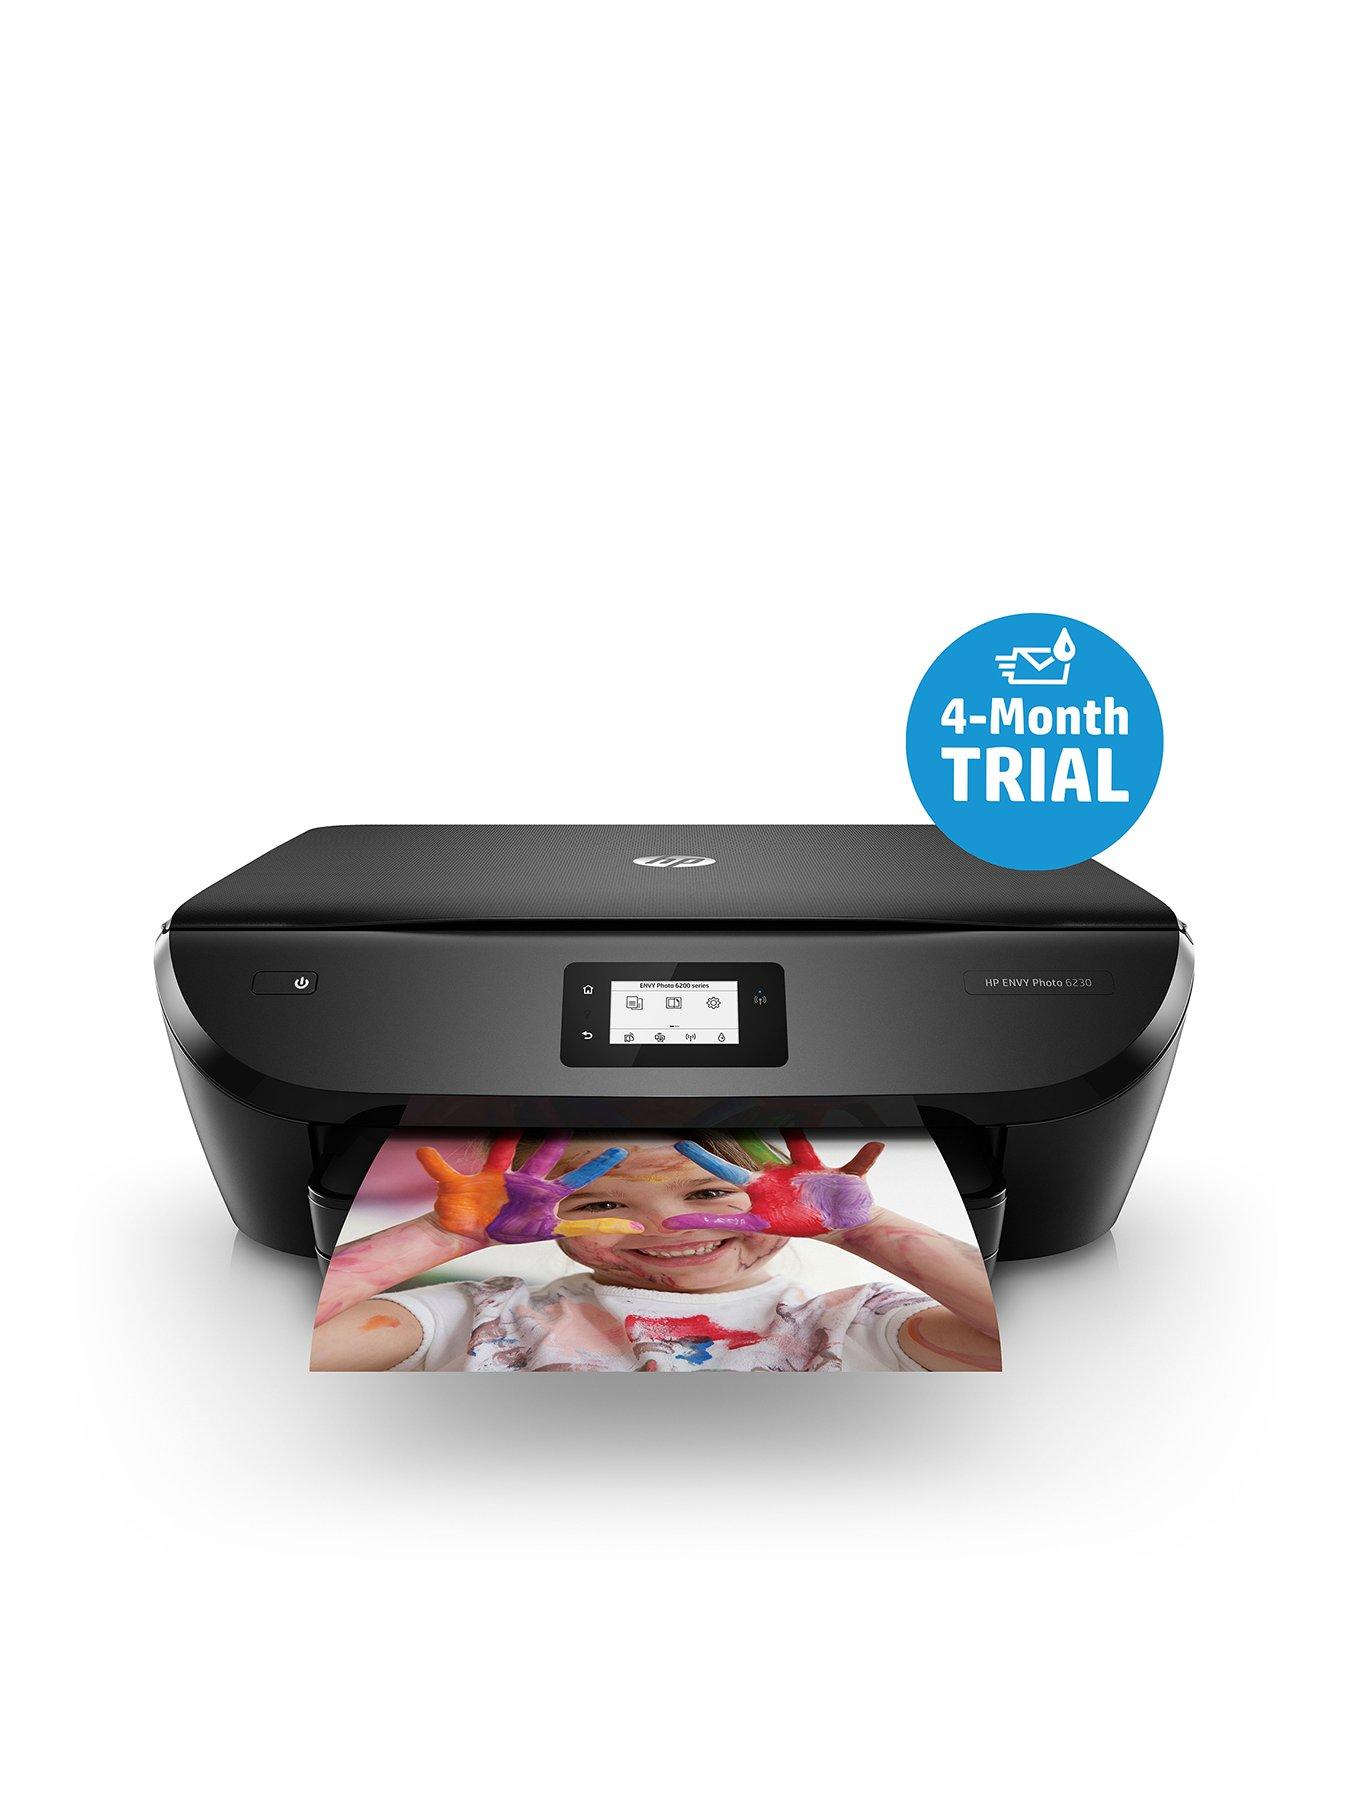 Hp Envy Photo 6230 Printer With Optional Ink And Photo Paper 25